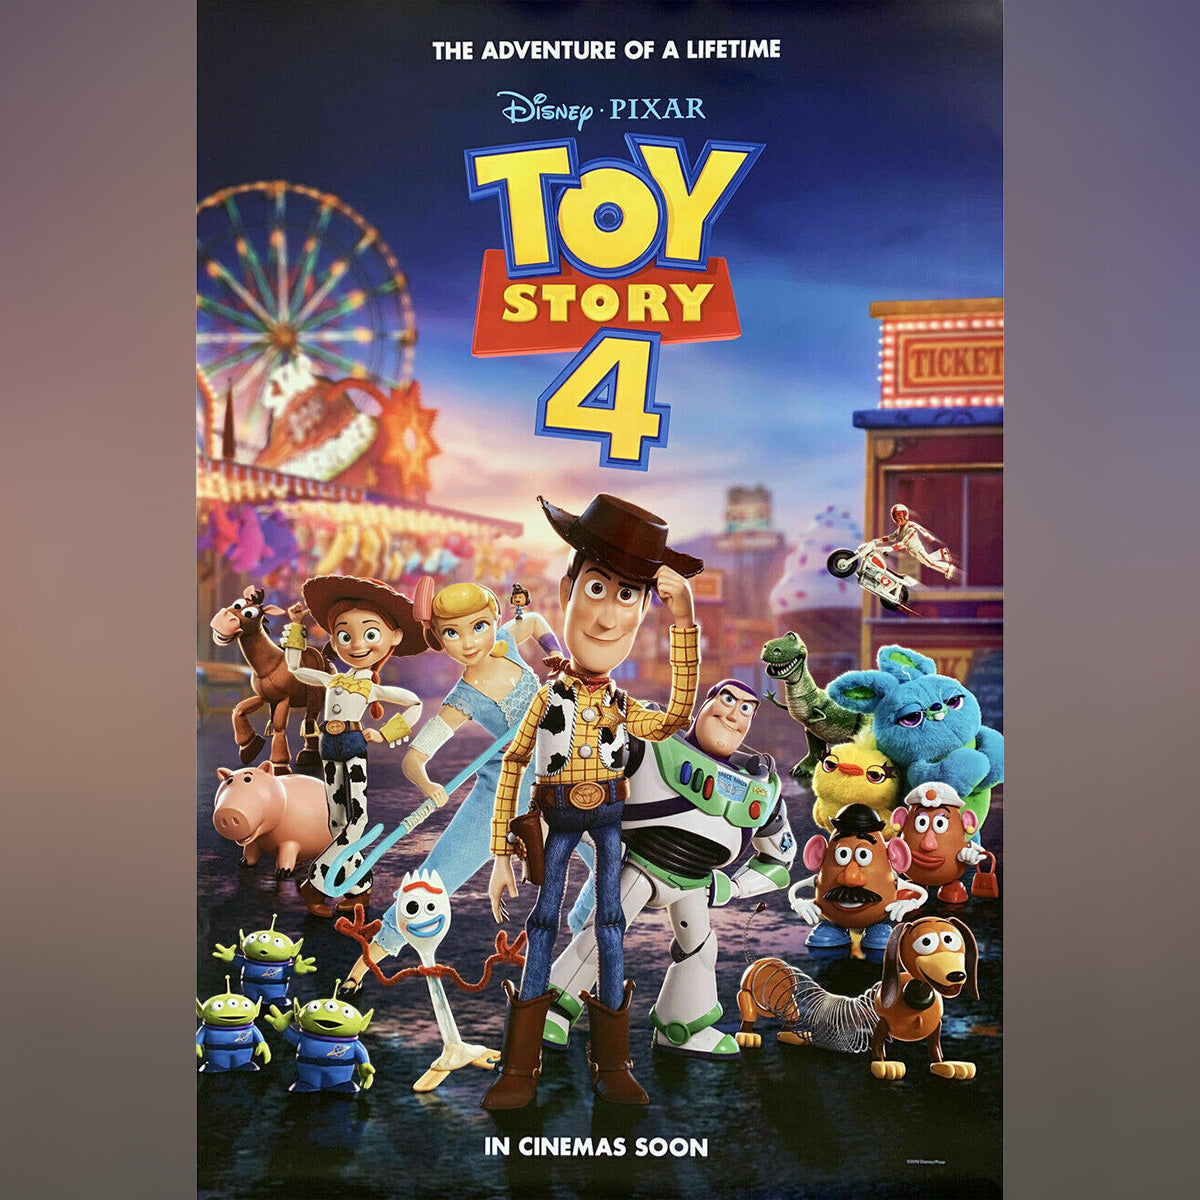 Original Movie Poster of Toy Story 4 (2019)